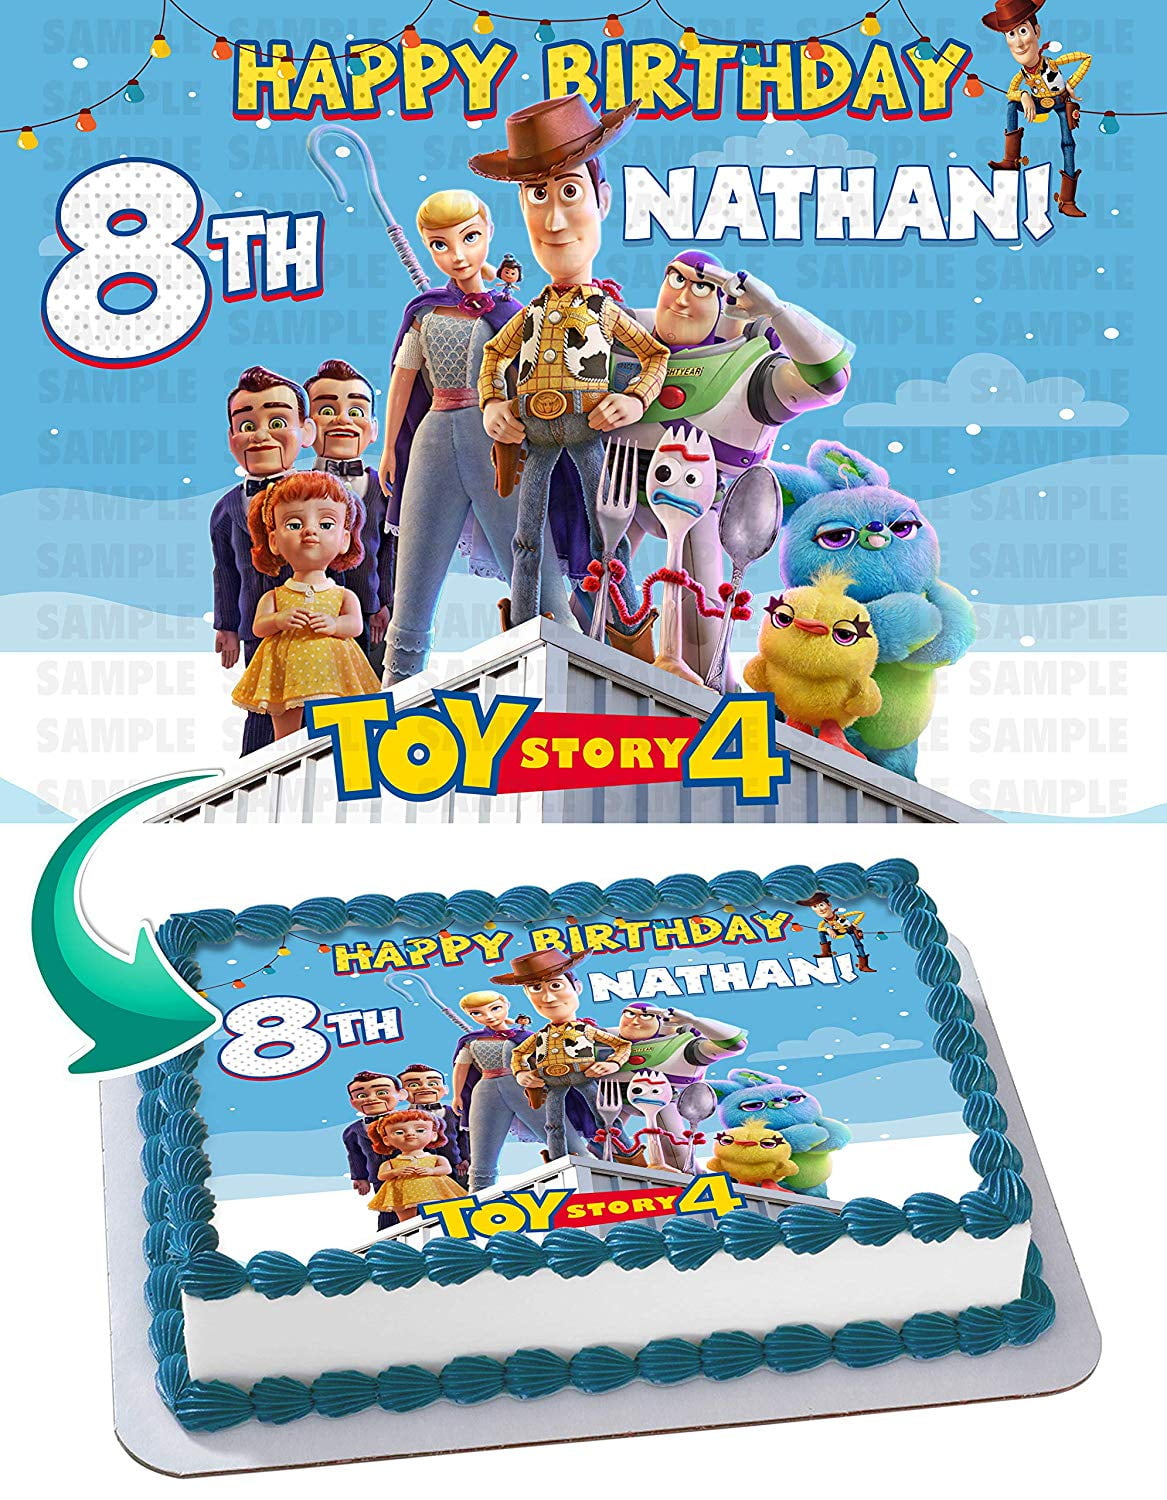 Toy Story Edible Personalized Cake Topper Image Birthday Party 19cm uncut